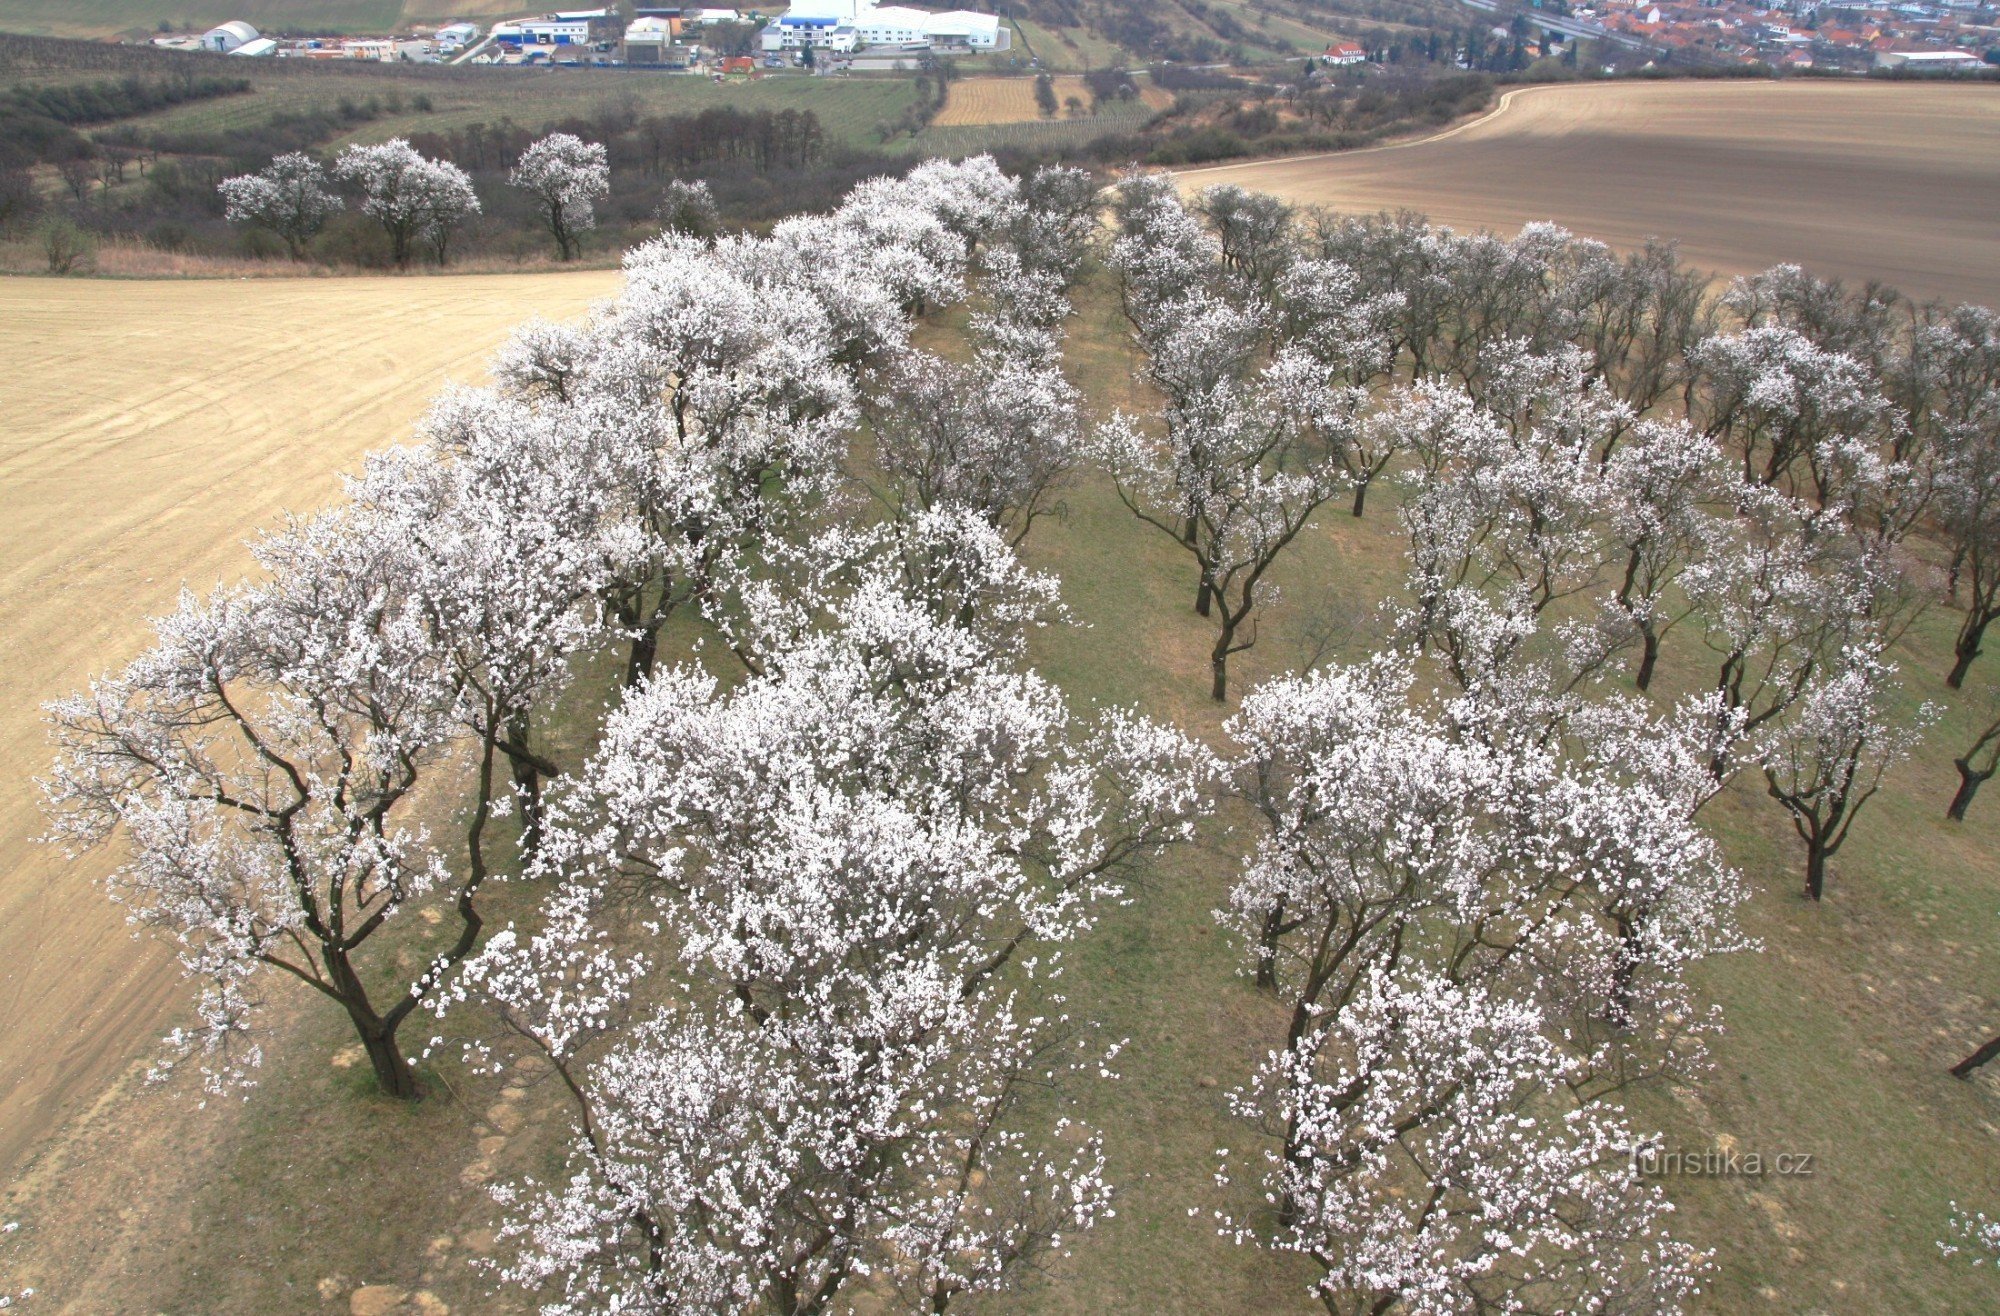 Almond orchard from the observation tower